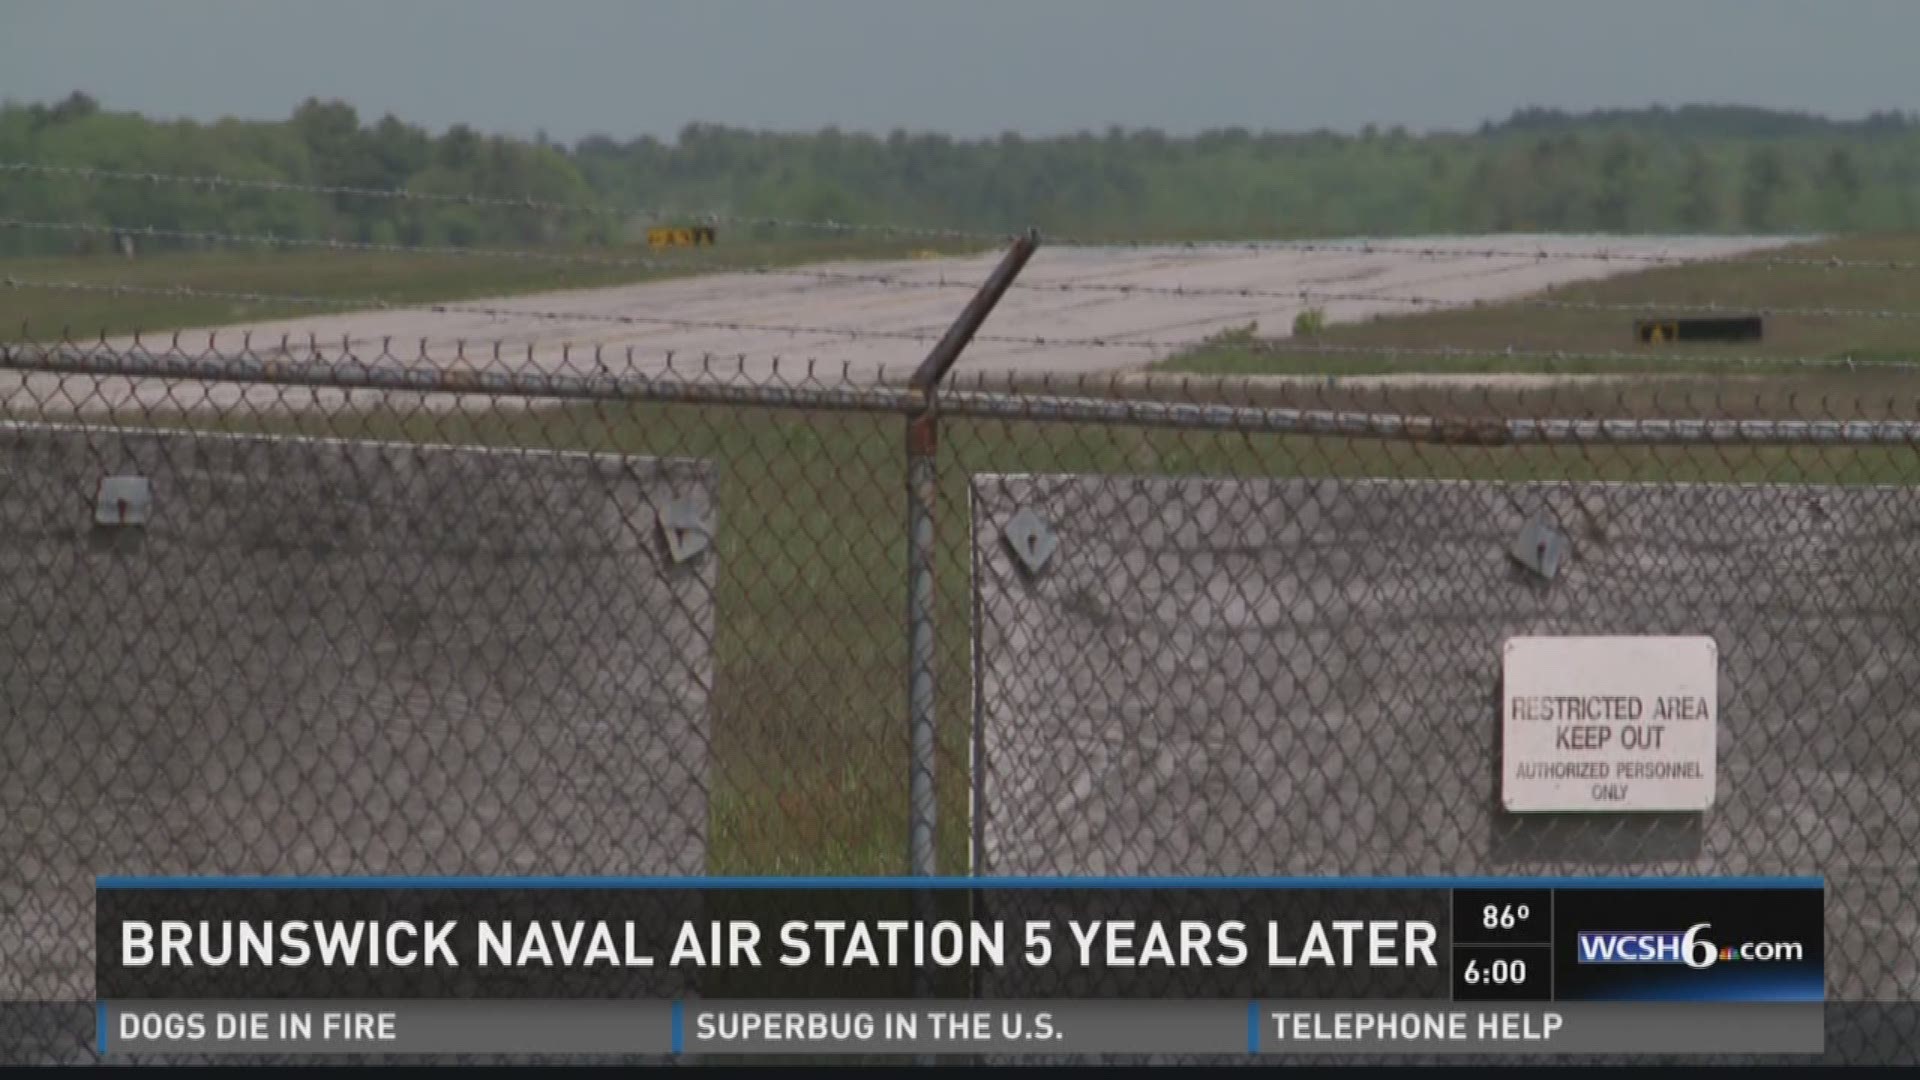 Brunswick Naval Air Station 5 years later